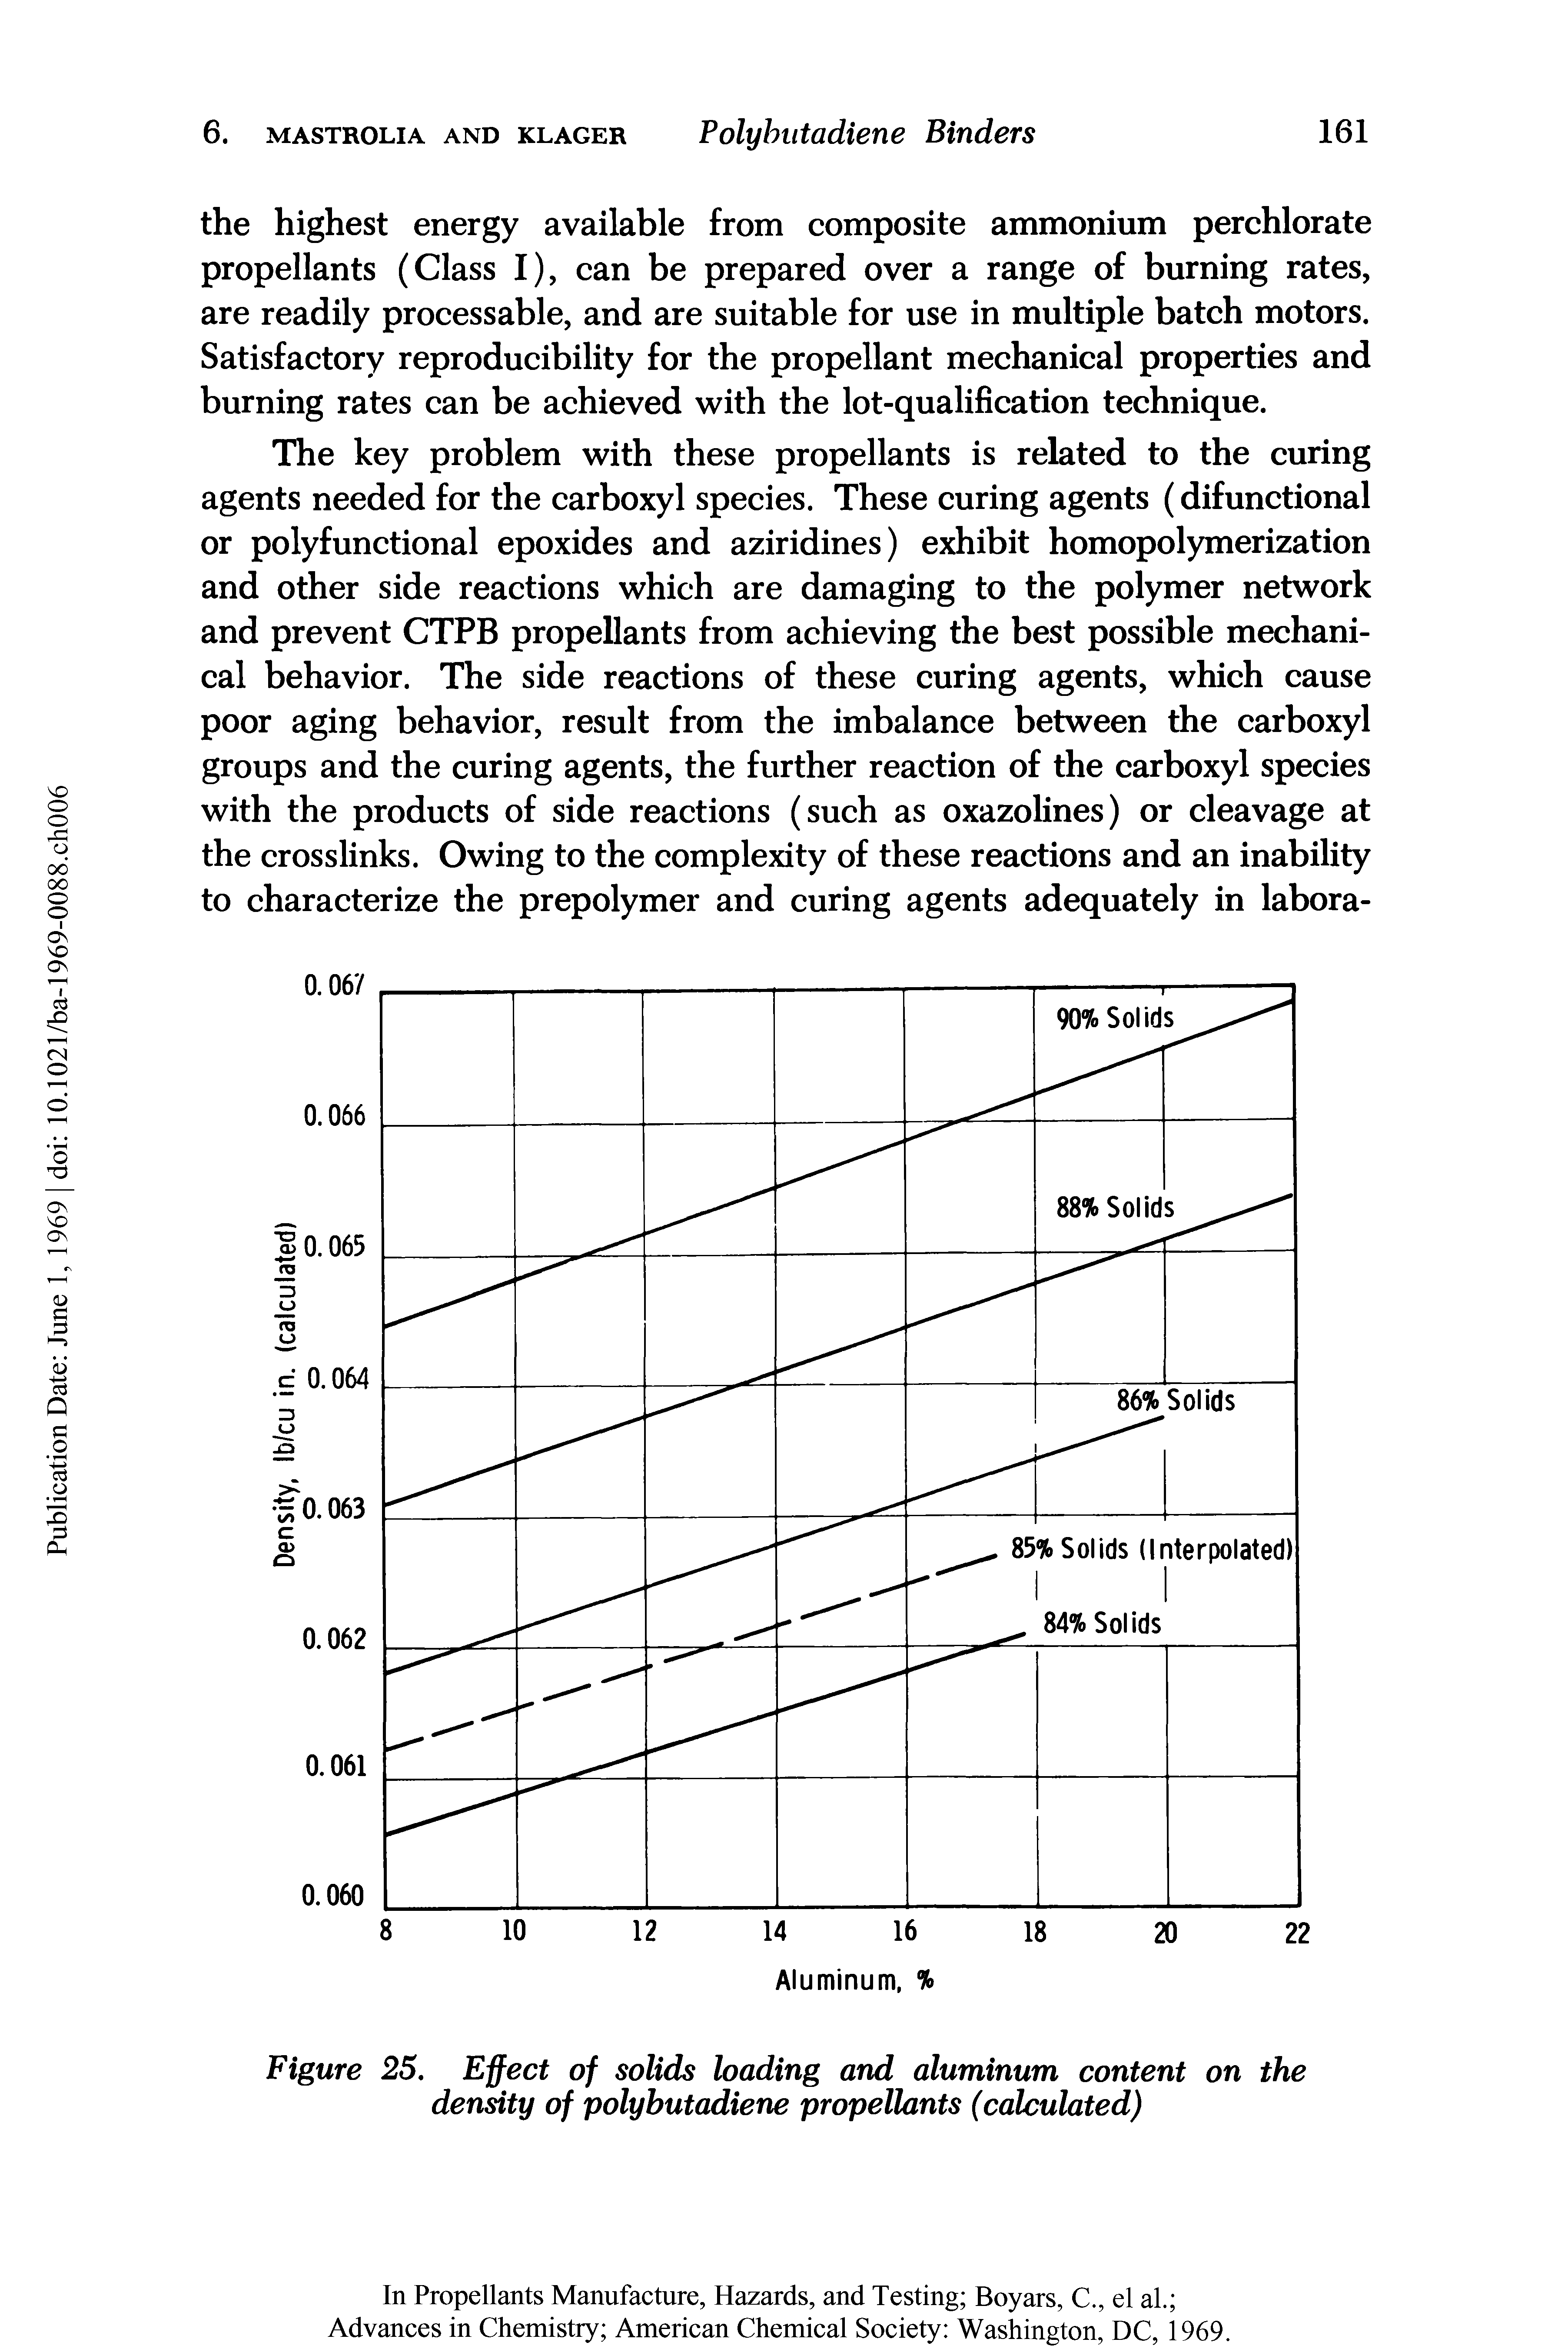 Figure 25. Effect of solids loading and aluminum content on the density of polybutadiene propellants (calculated)...